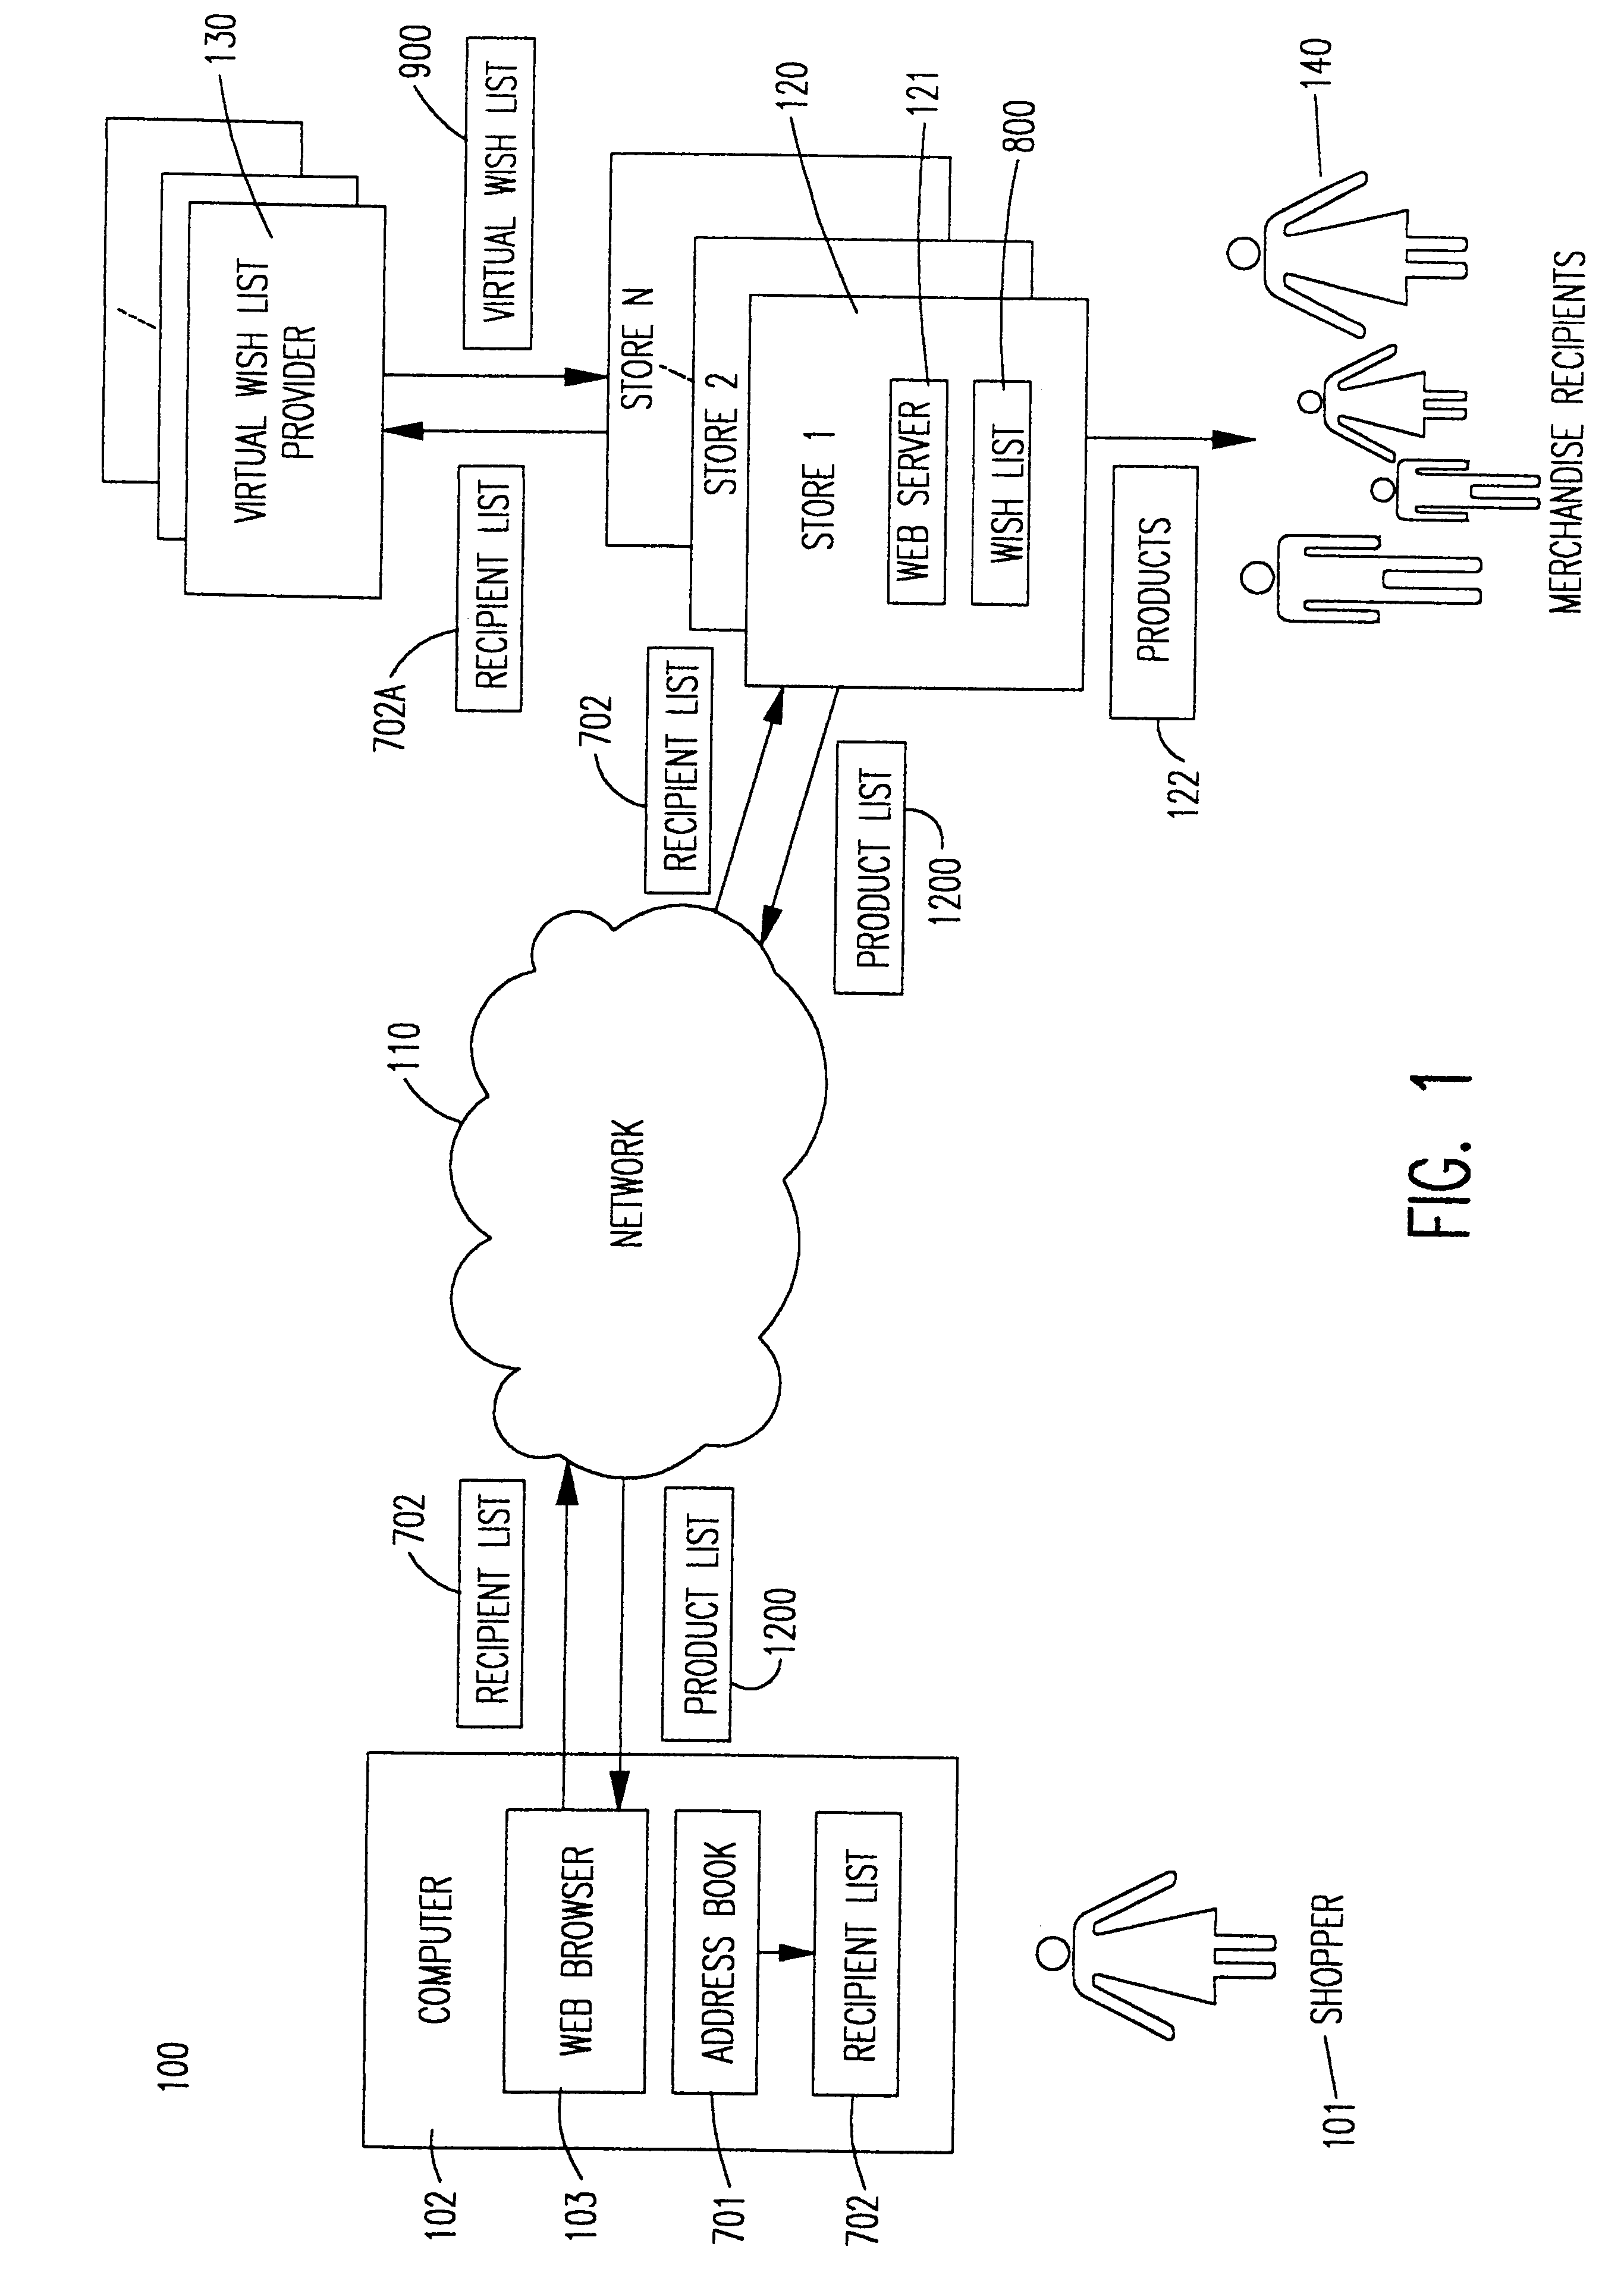 System and method for using virtual wish lists for assisting shopping over computer networks